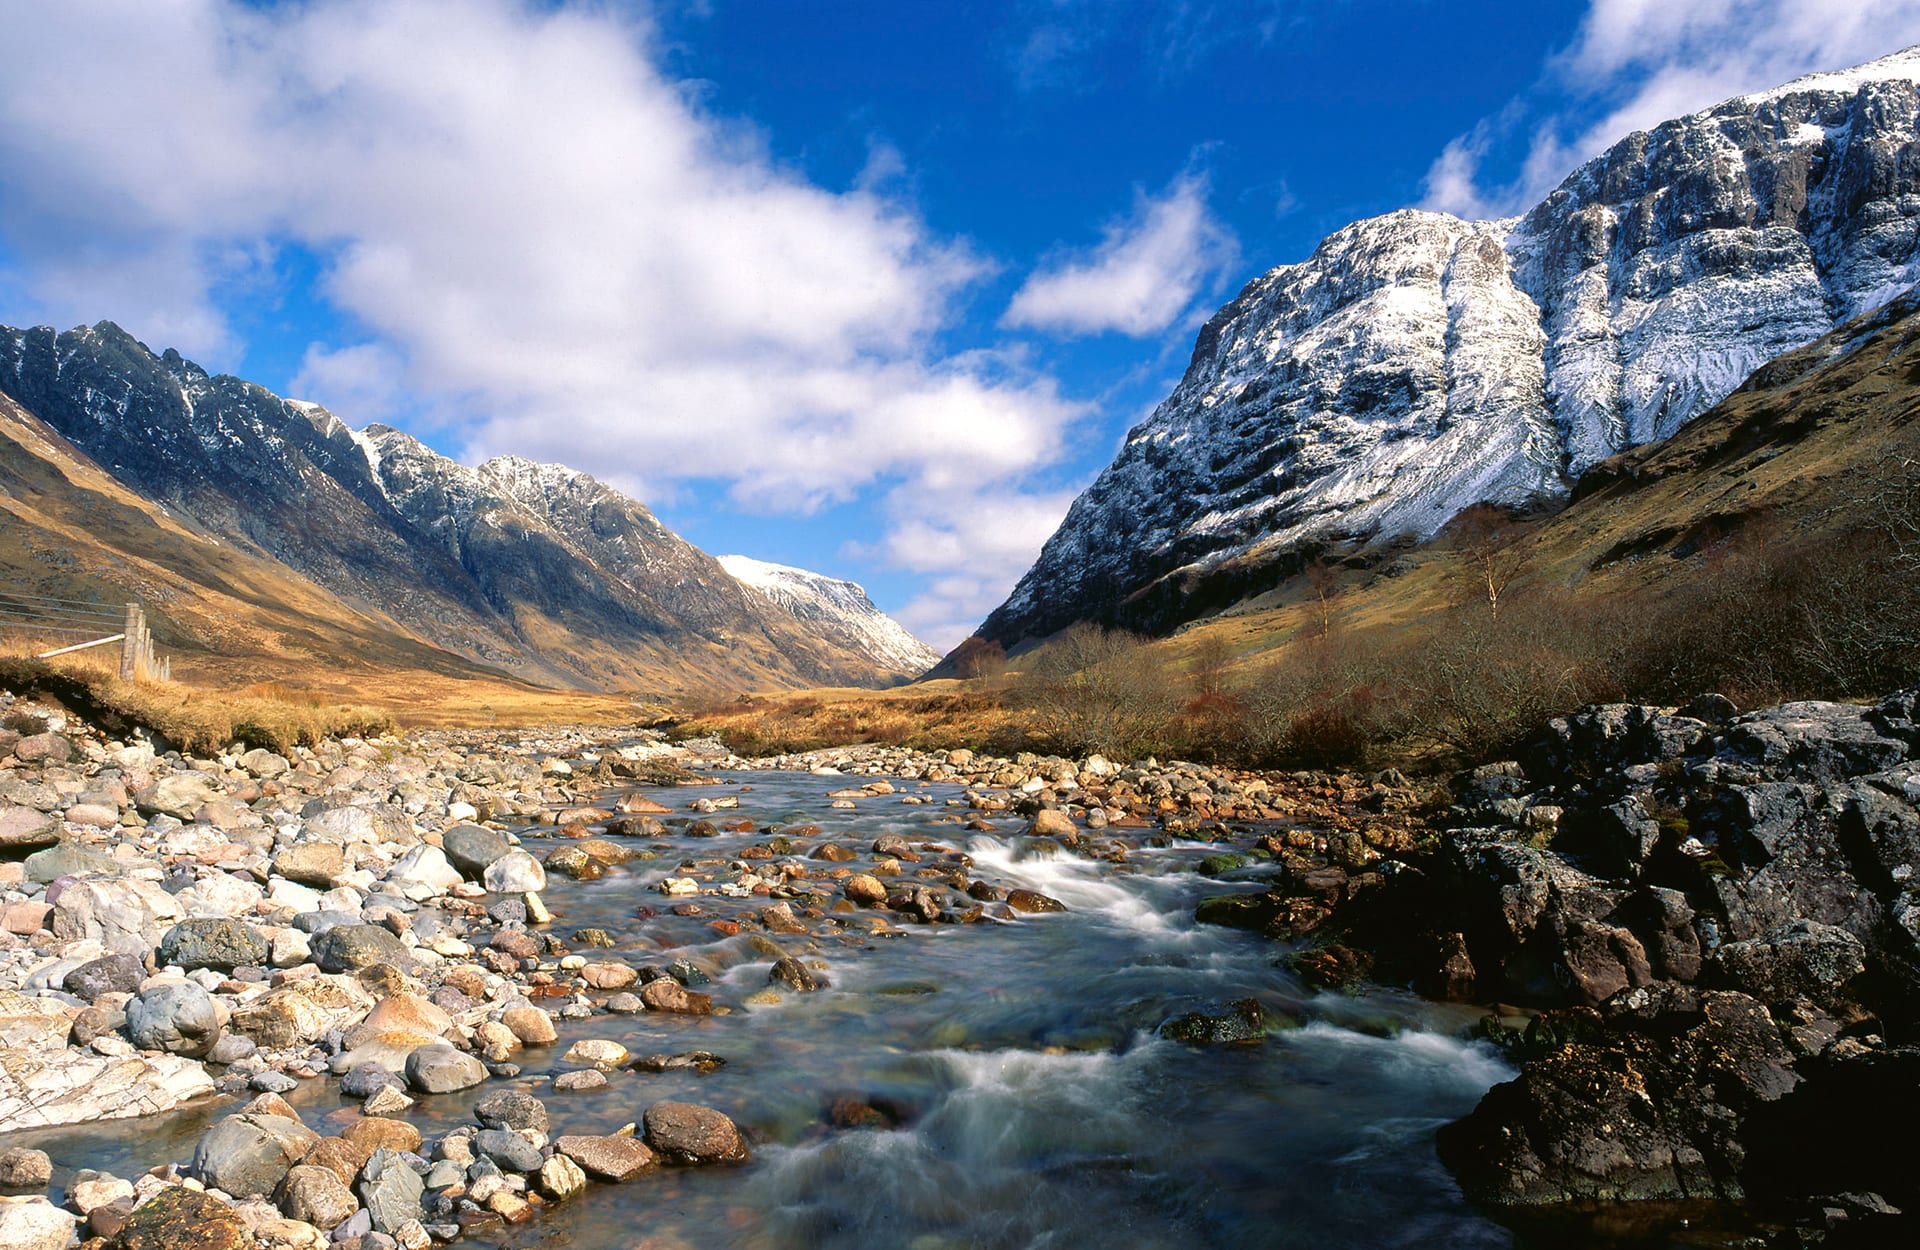 Glencoe is famous the world over for its natural beauty.